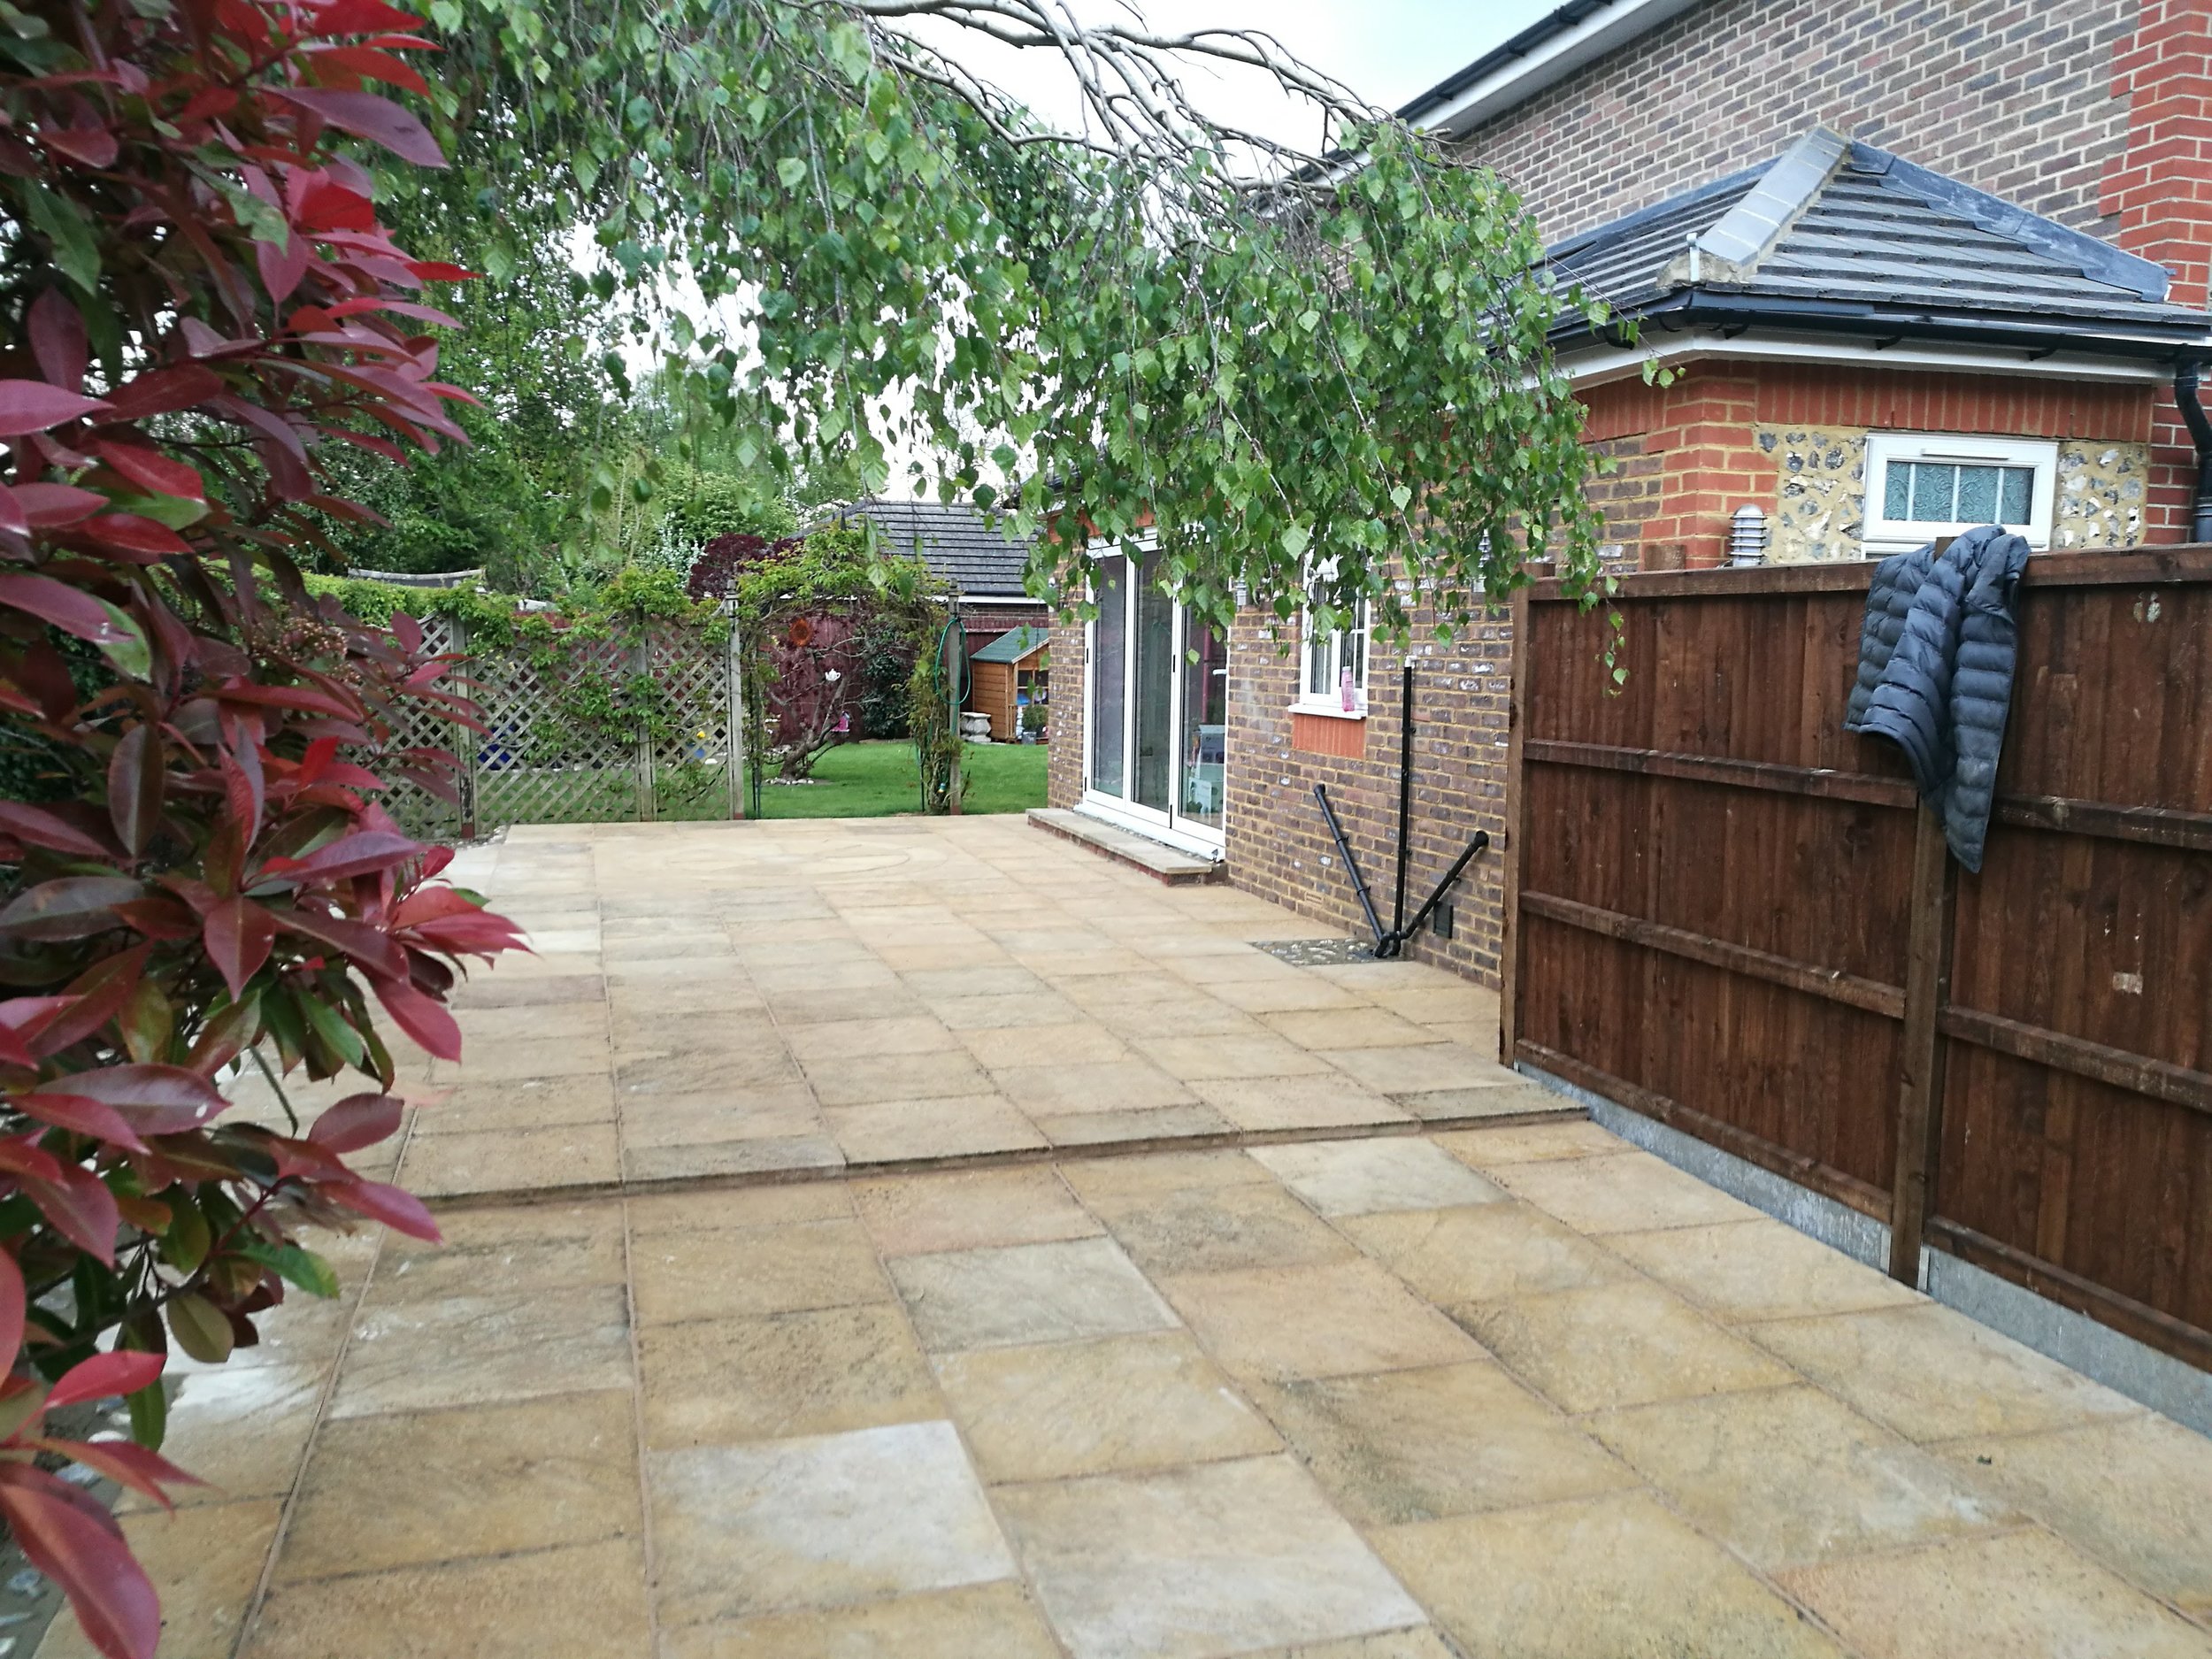 N E Gardencare Landscaping and Gardening in South East London Club Card 7.jpg